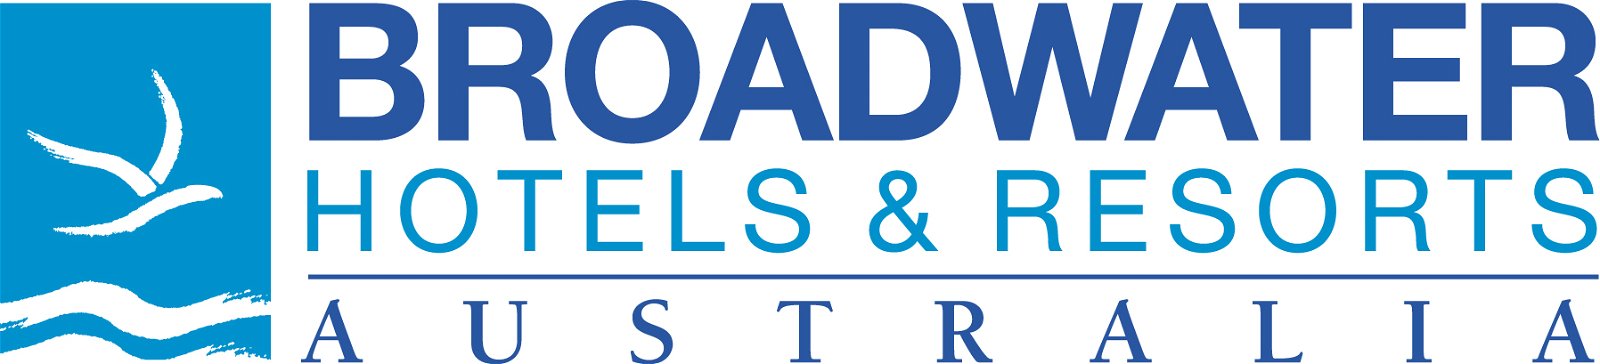 Broadwater Hotels and Resorts